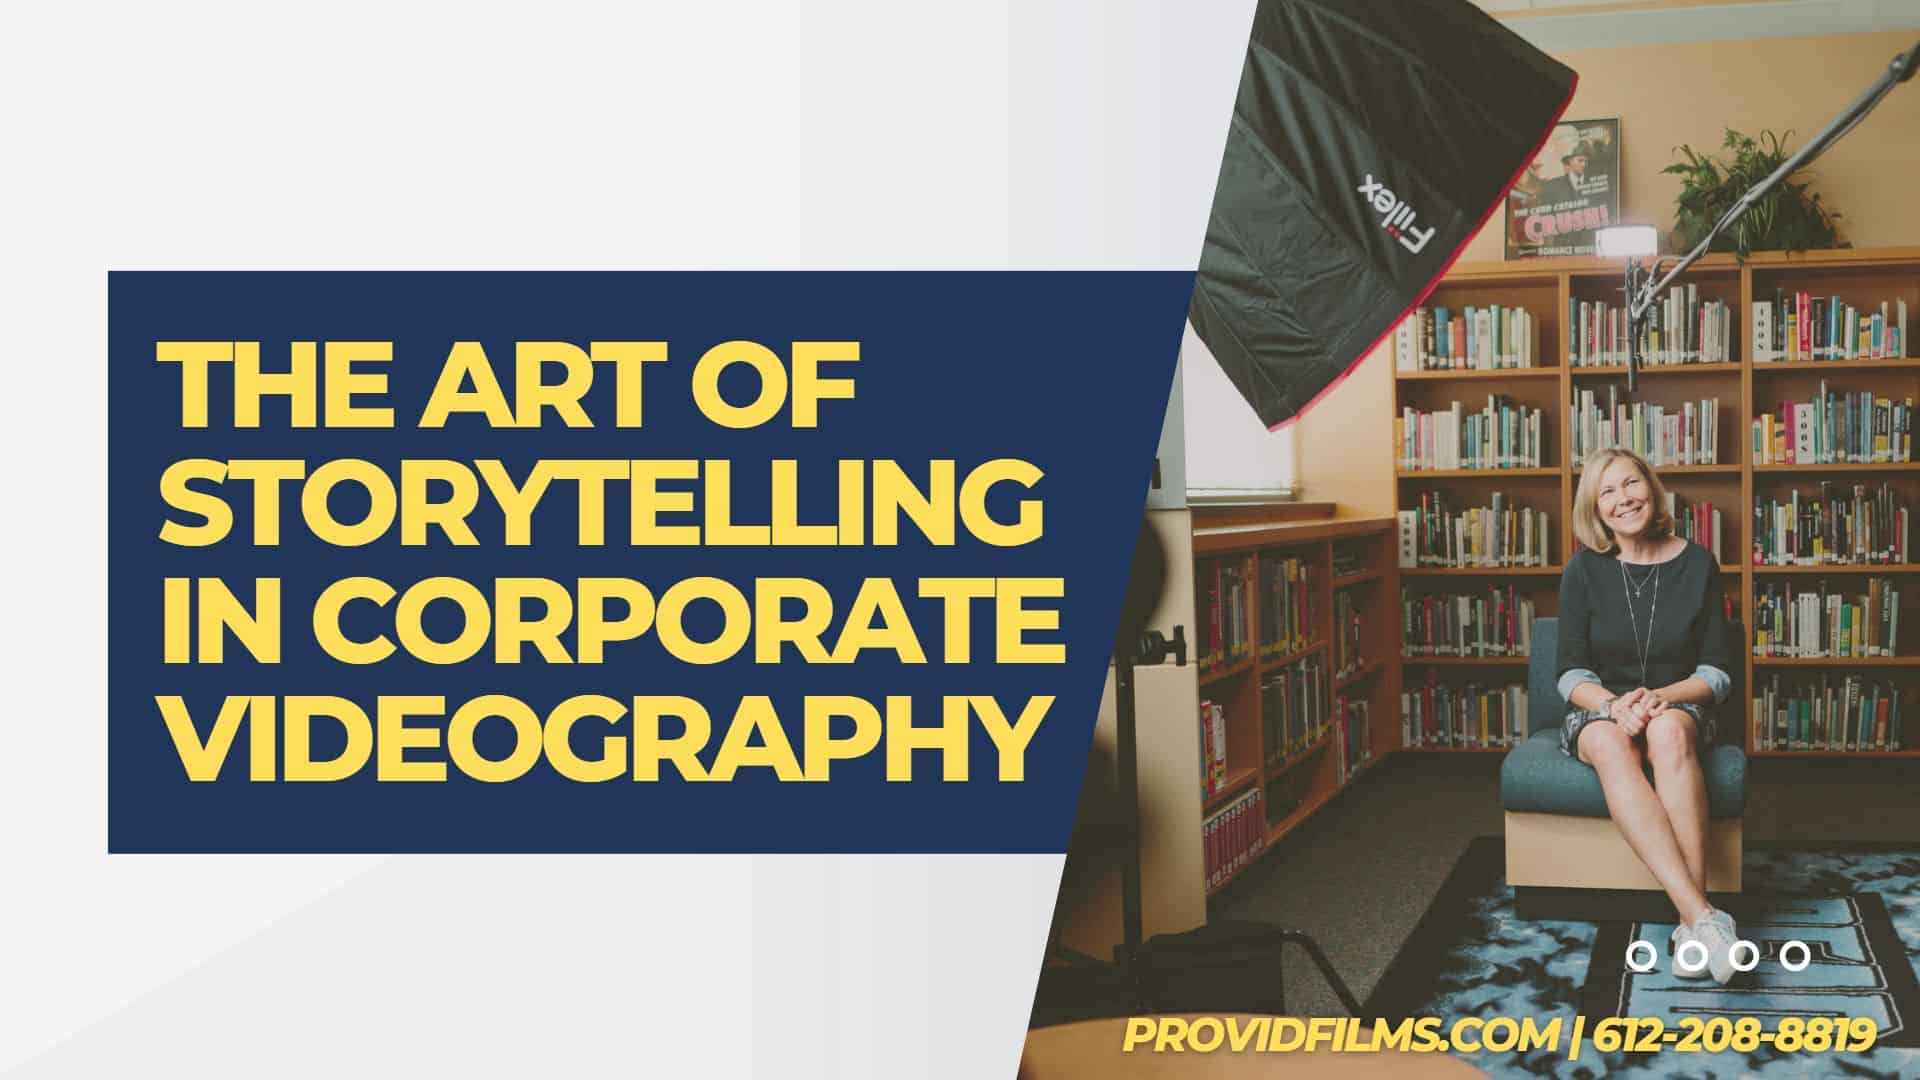 Graphic of a woman telling a story at a Library with the text saying "The Art of Storytelling in Corporate Videography"